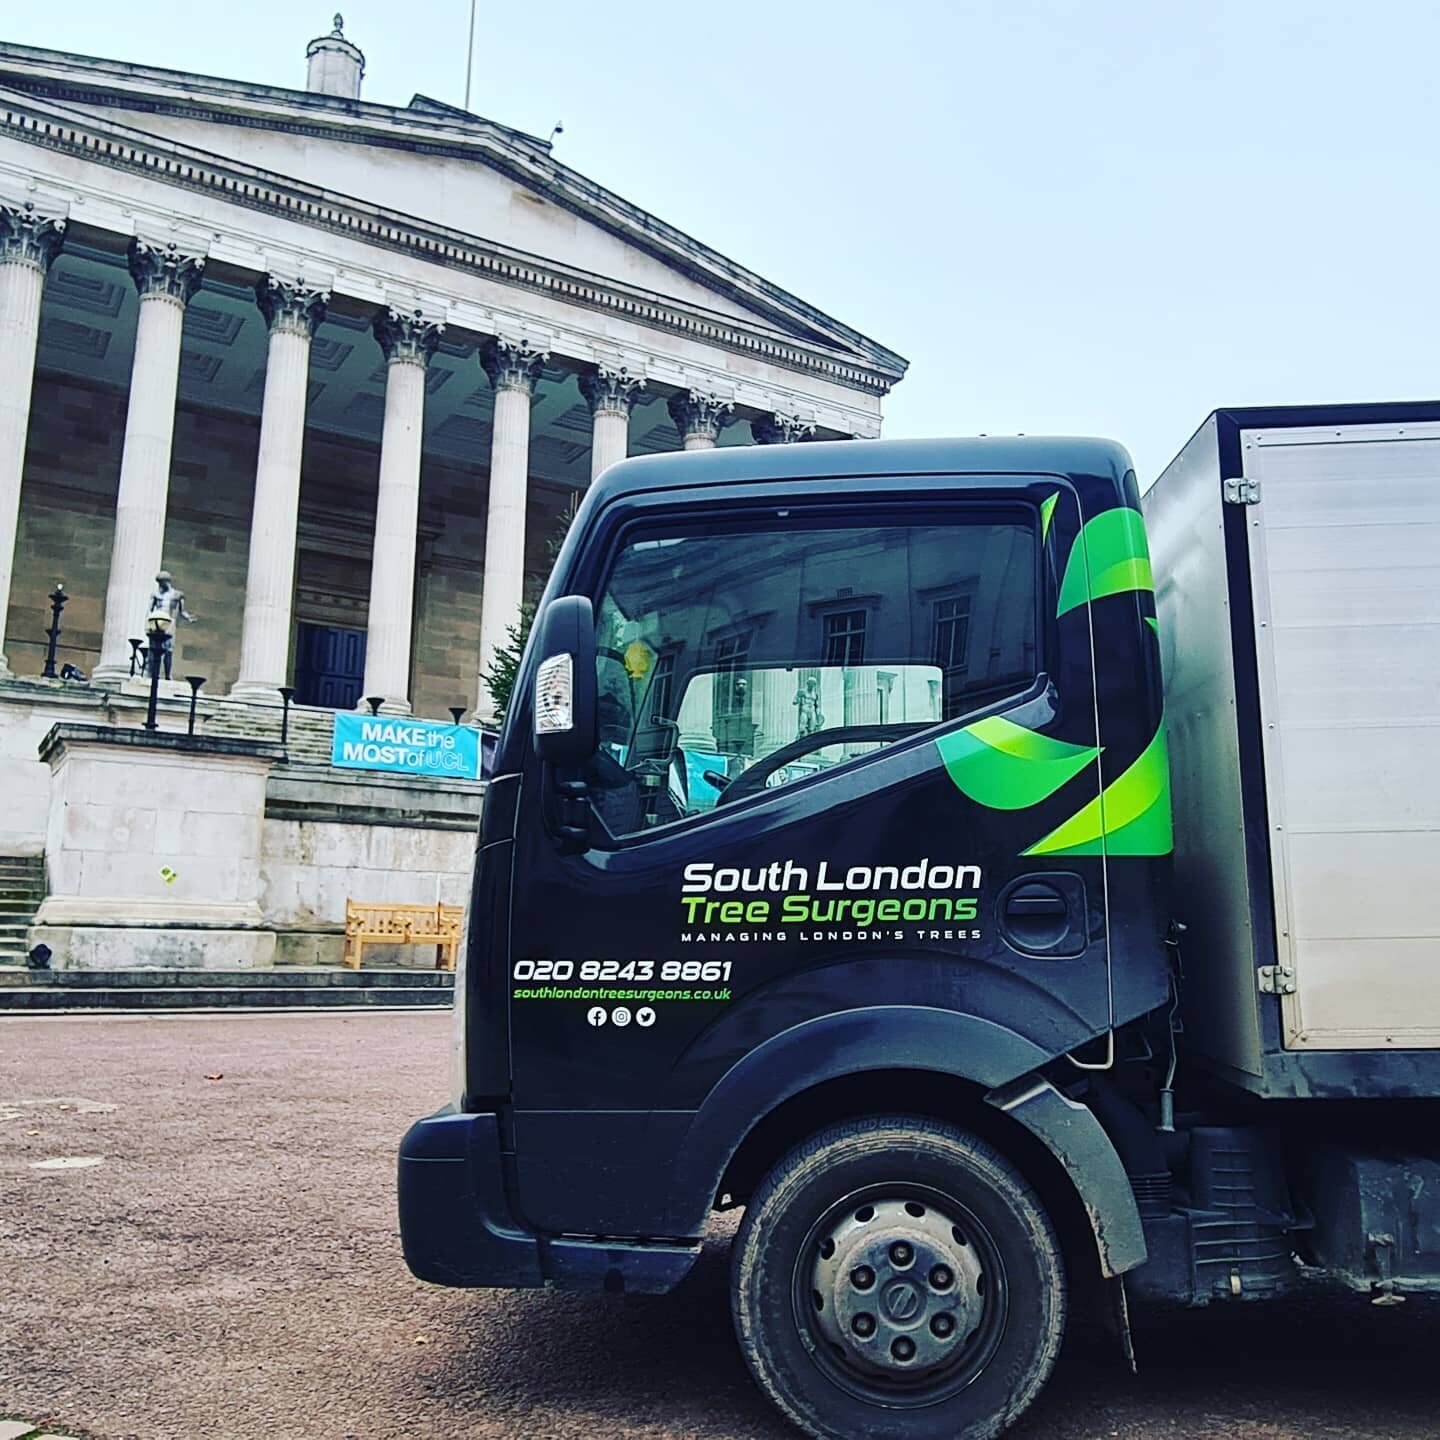 Almost done with the Christmas lights this year! 
All wrapped up at University College London 👌

#southlondontreesurgeons #treesurgery #arborist #treesurgeon #treesurgeons #treeservices #treecare #southlondon #southeastlondon #southwestlondon 
#lond